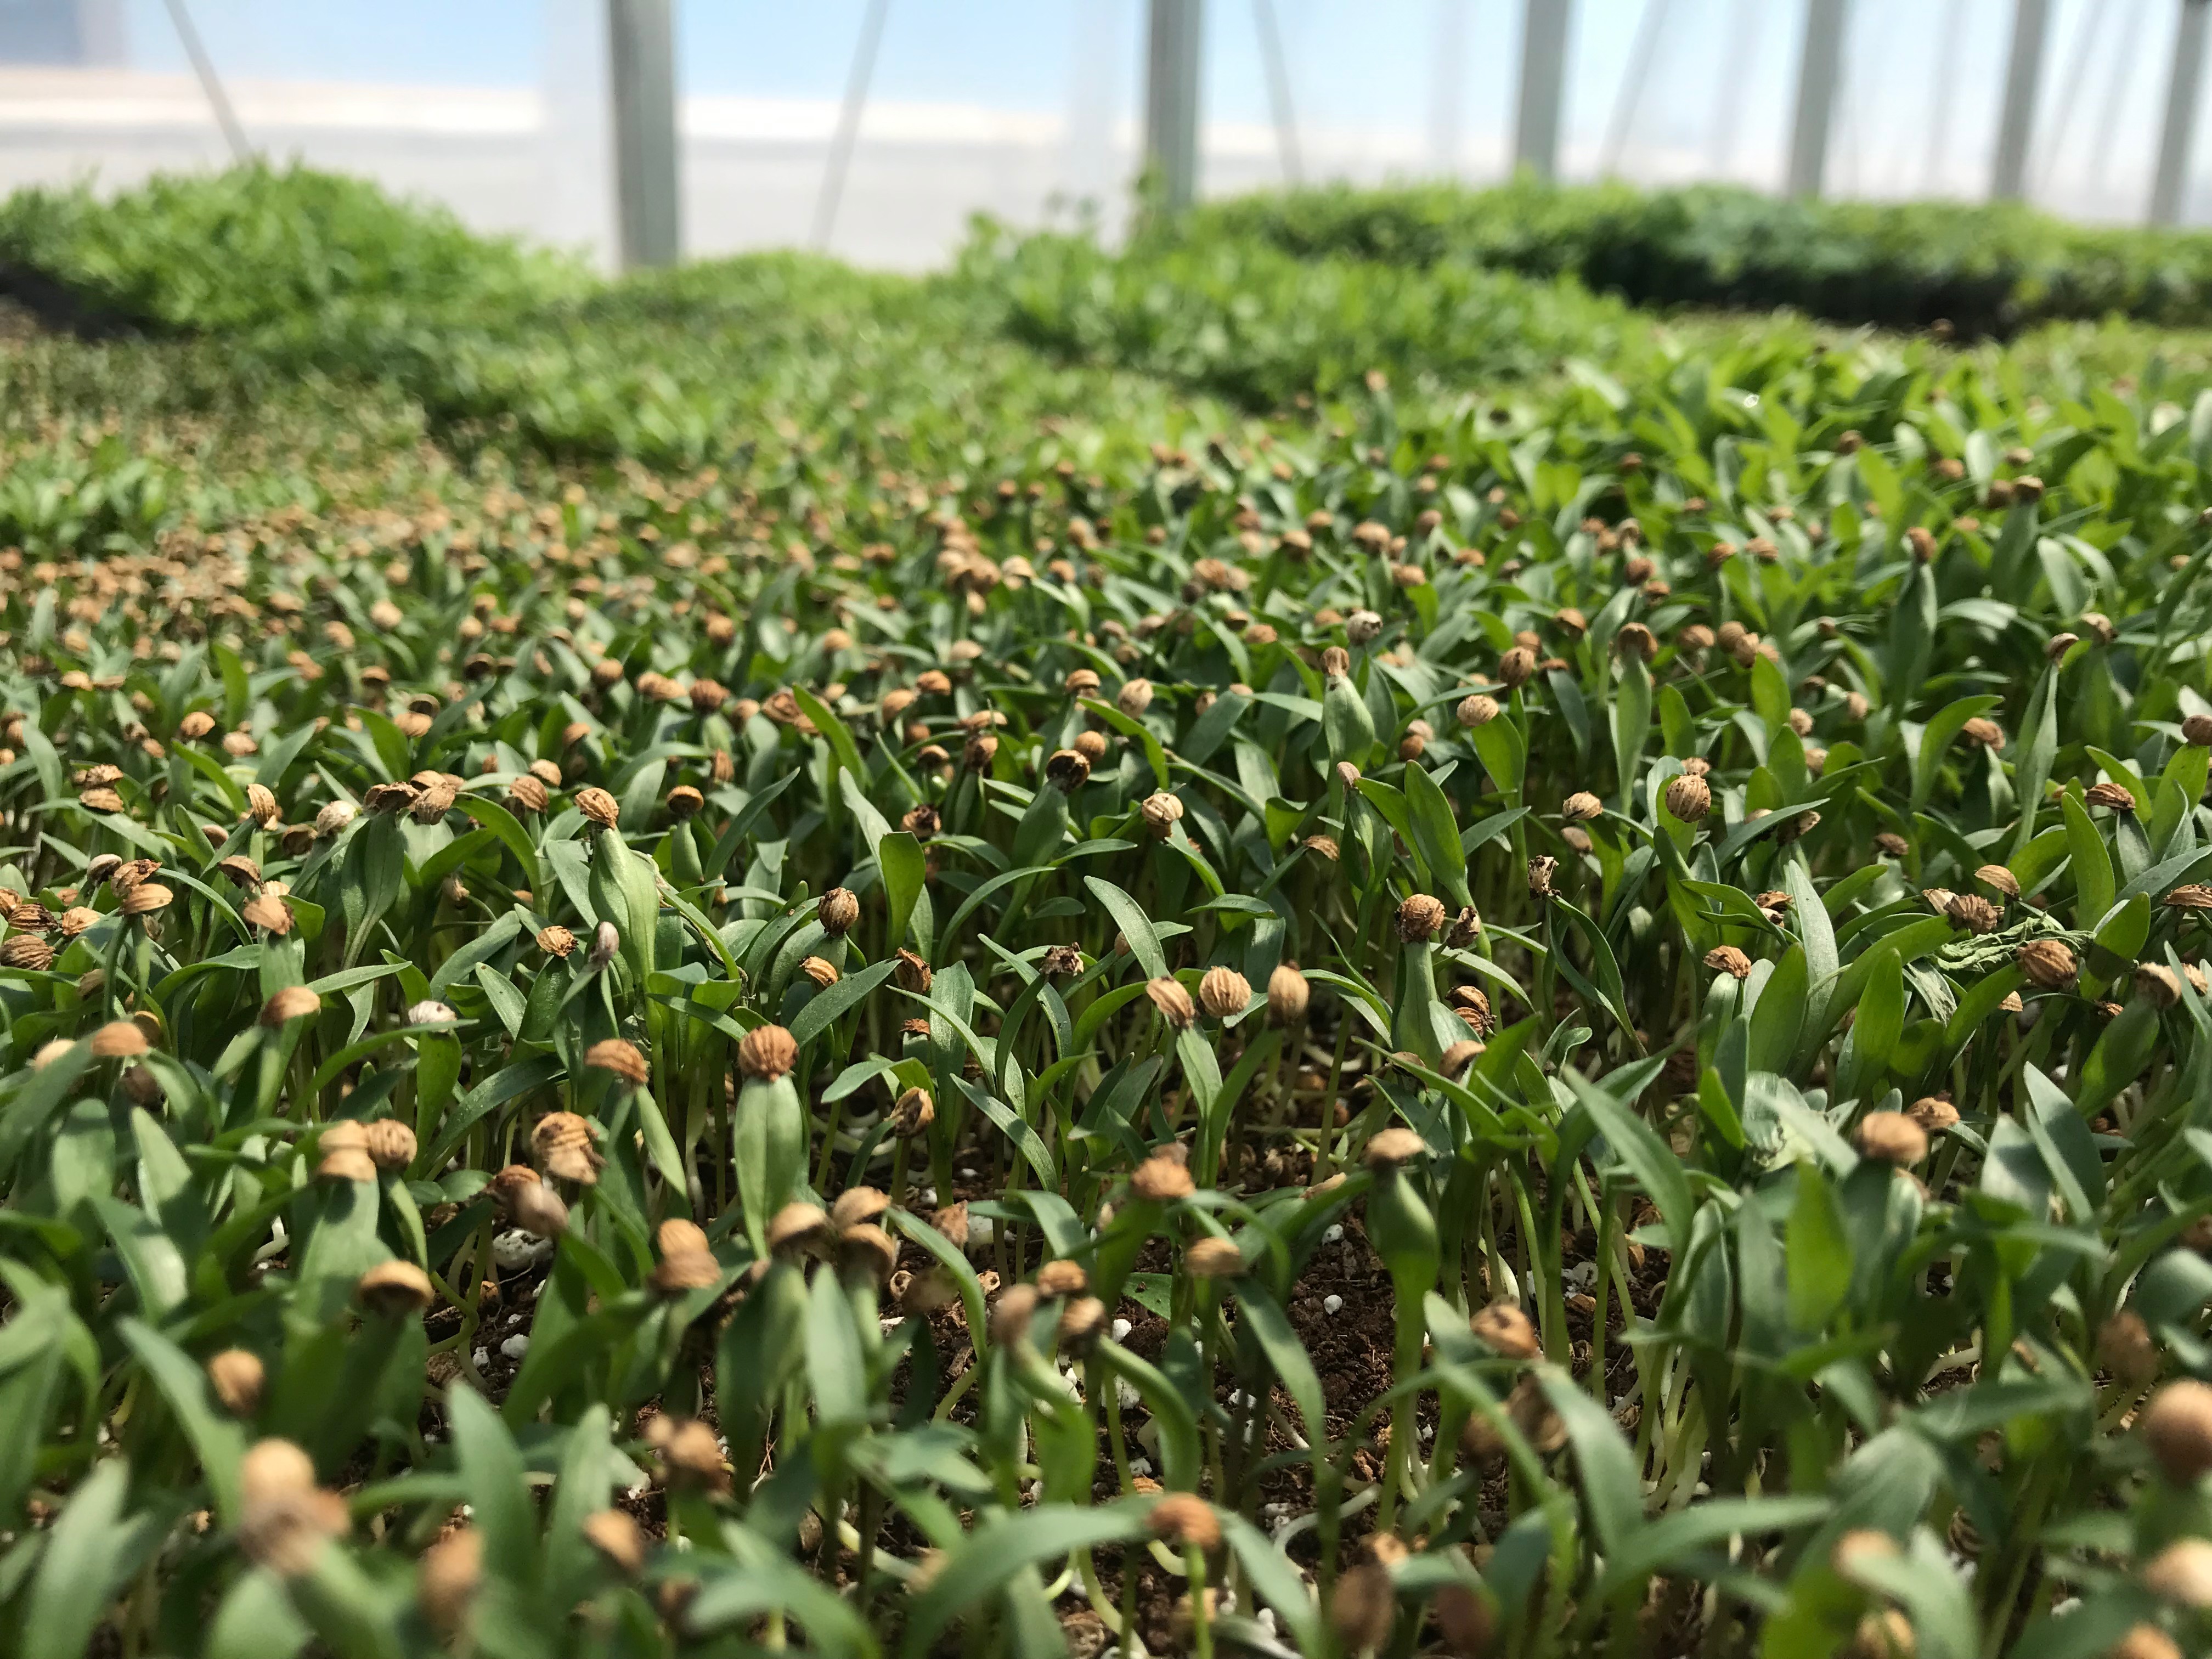 Close-up photo of microgreens growing in a tray in a greenhouse